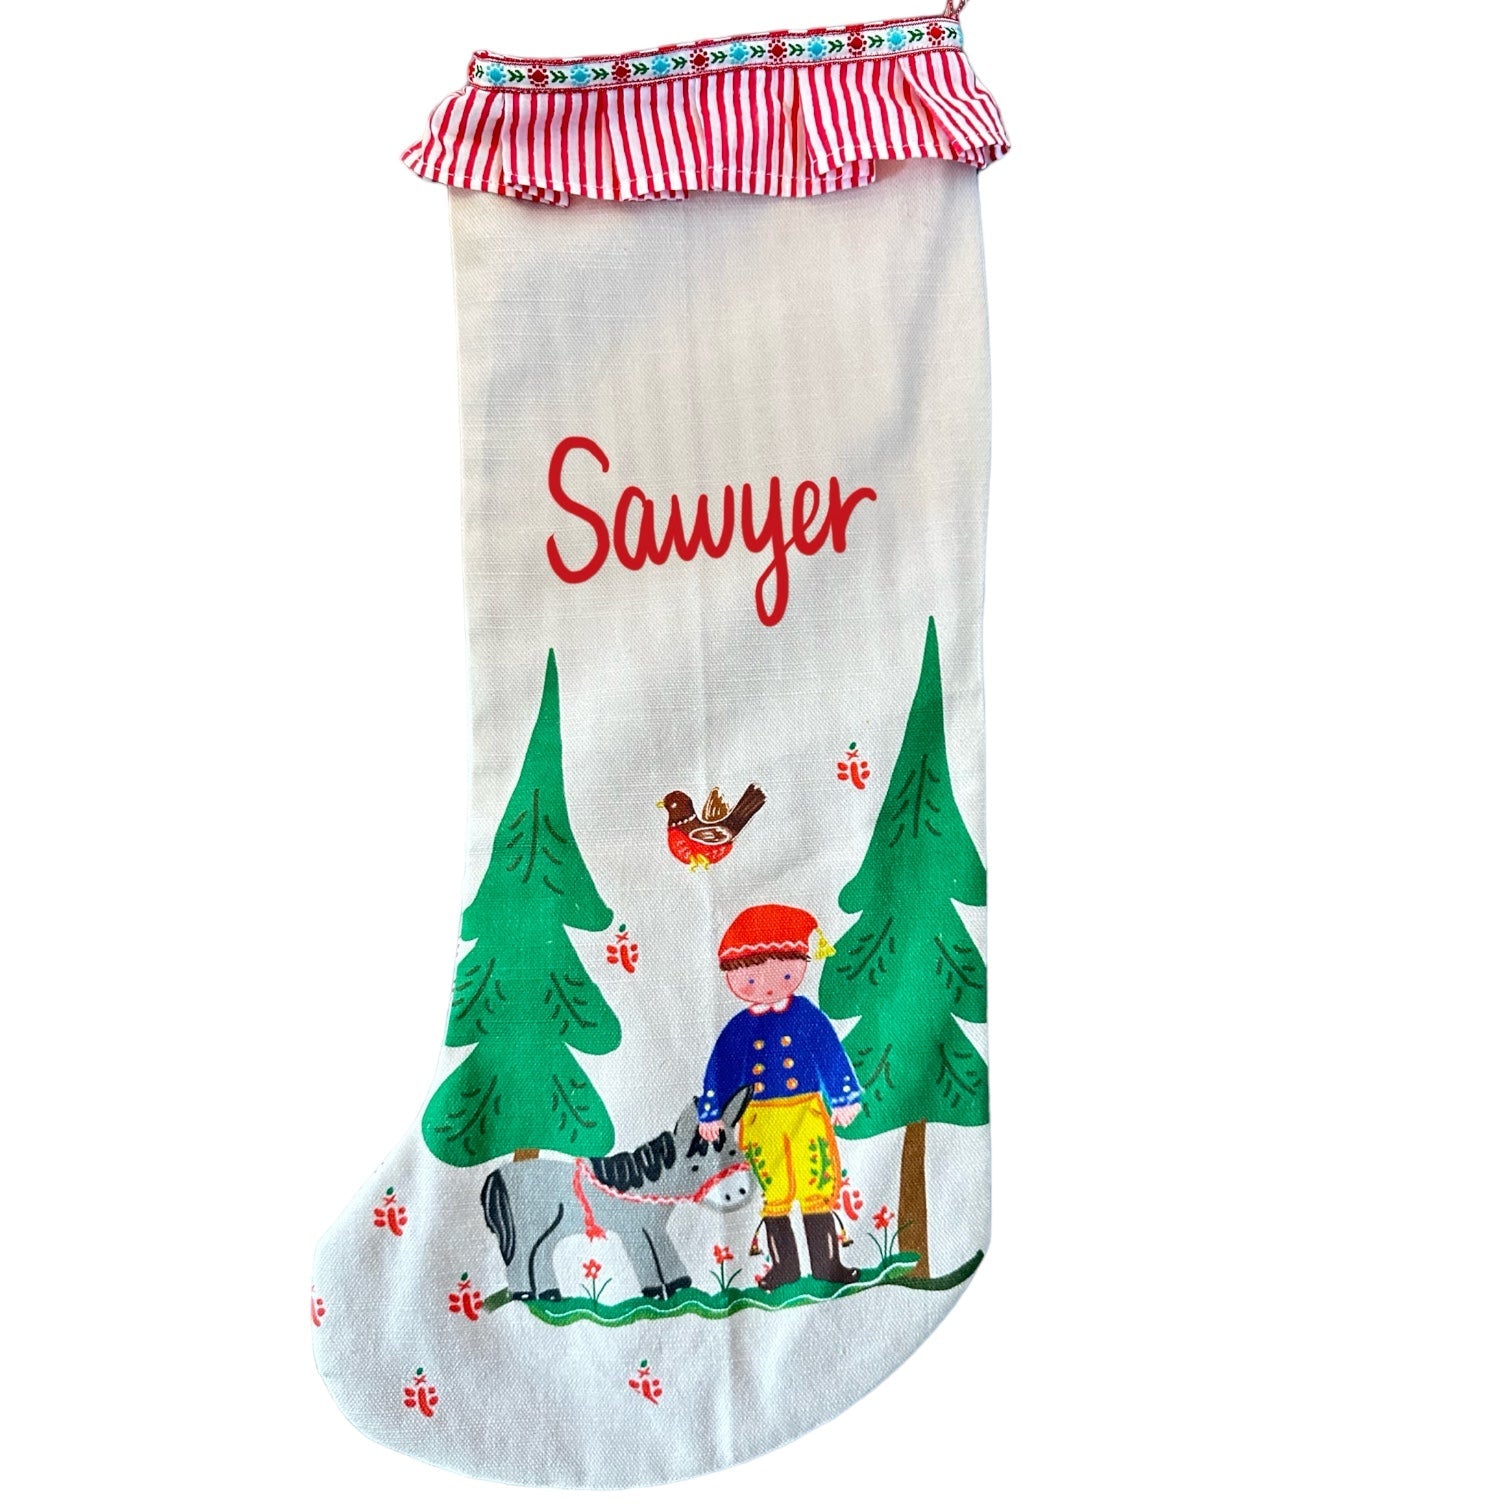 Stocking - Boy with Trees and Donkey - Premium  from Tricia Lowenfield Design 